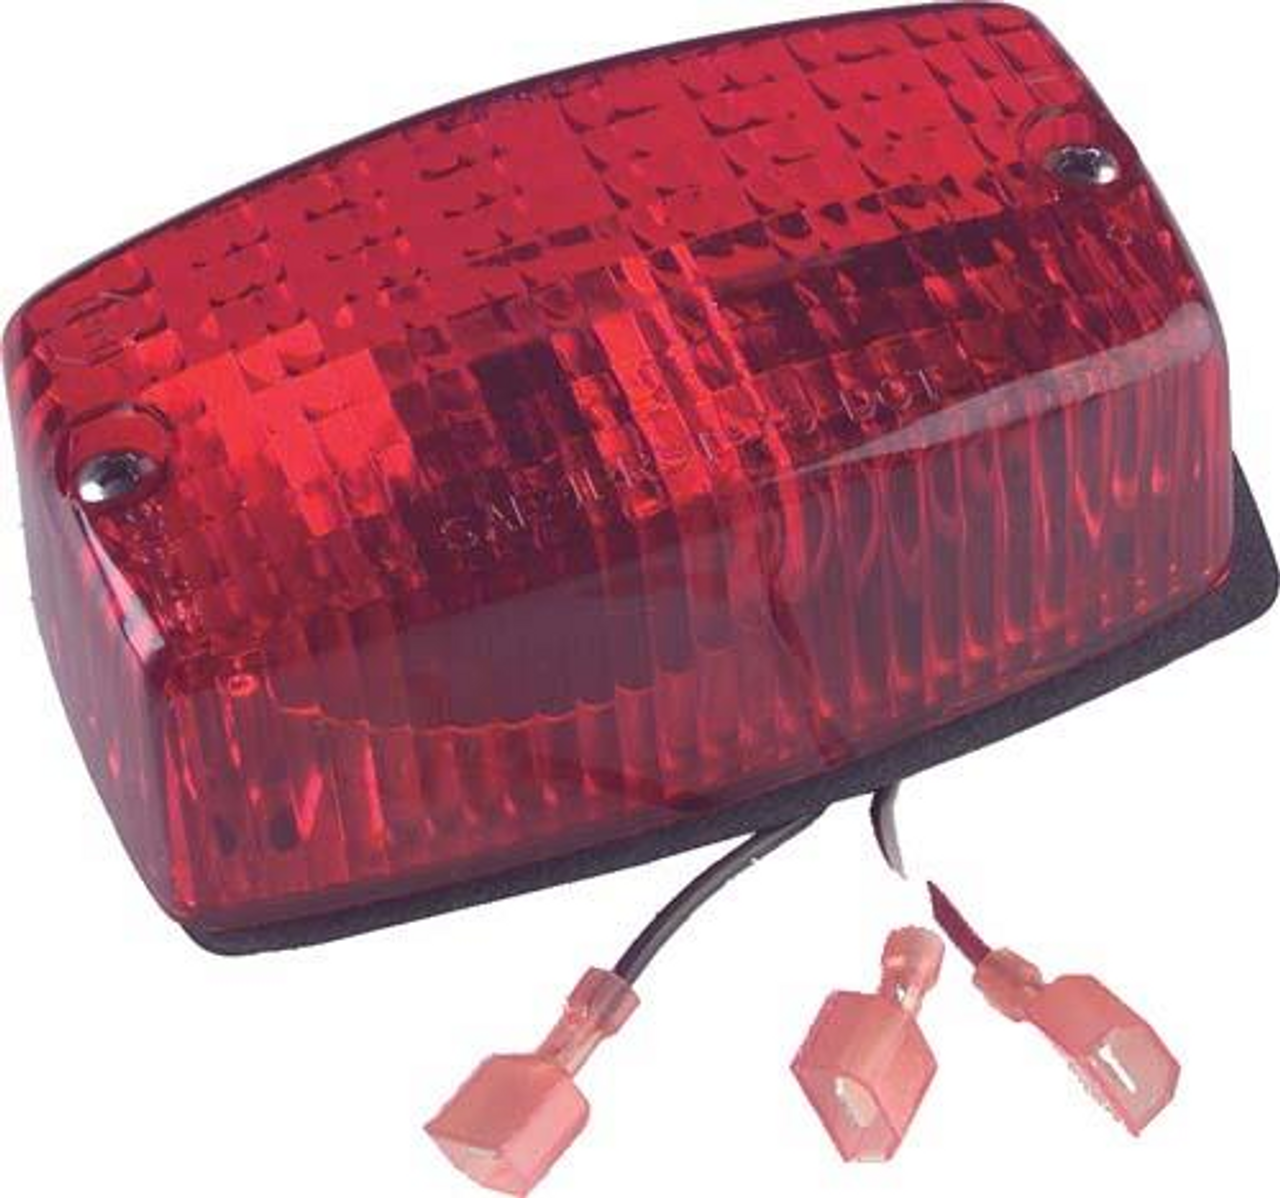 Halogen 2012-Volt Taillight Assembly. Three Wires, 2472, 610416